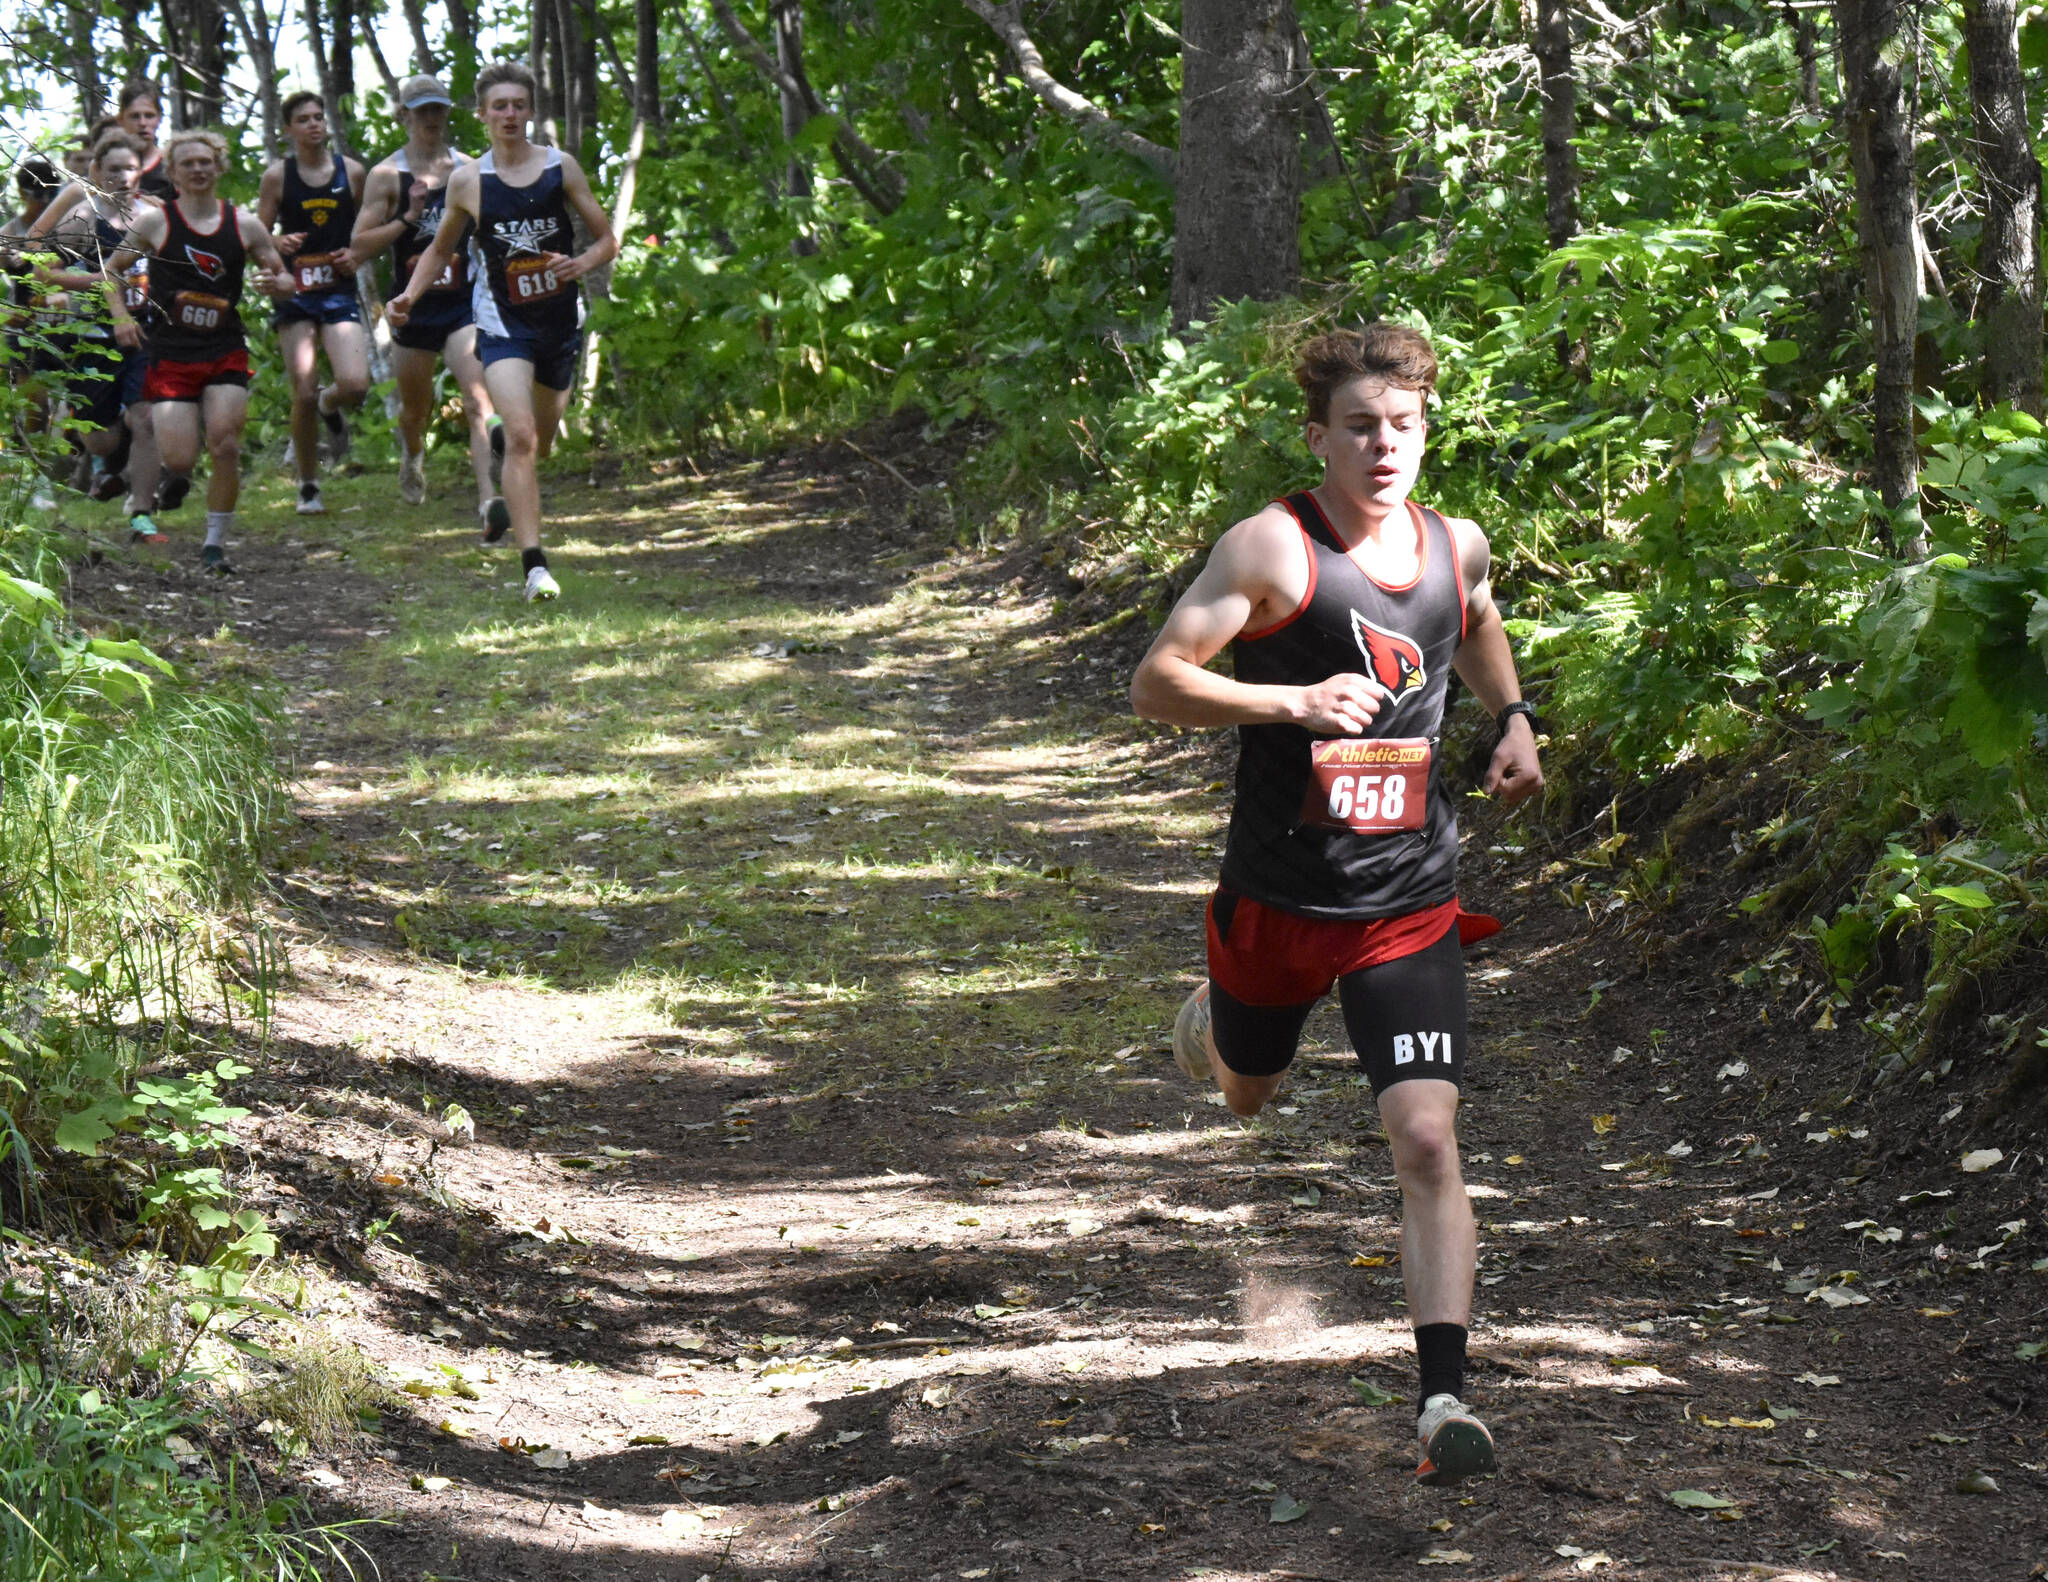 Greg Fallon takes a commanding lead on the way to victory in the junior-senior boys race at the Class Races on Monday, Aug. 14, 2023, at Nikiski High School in Nikiski, Alaska. (Photo by Jeff Helminiak/Peninsula Clarion)